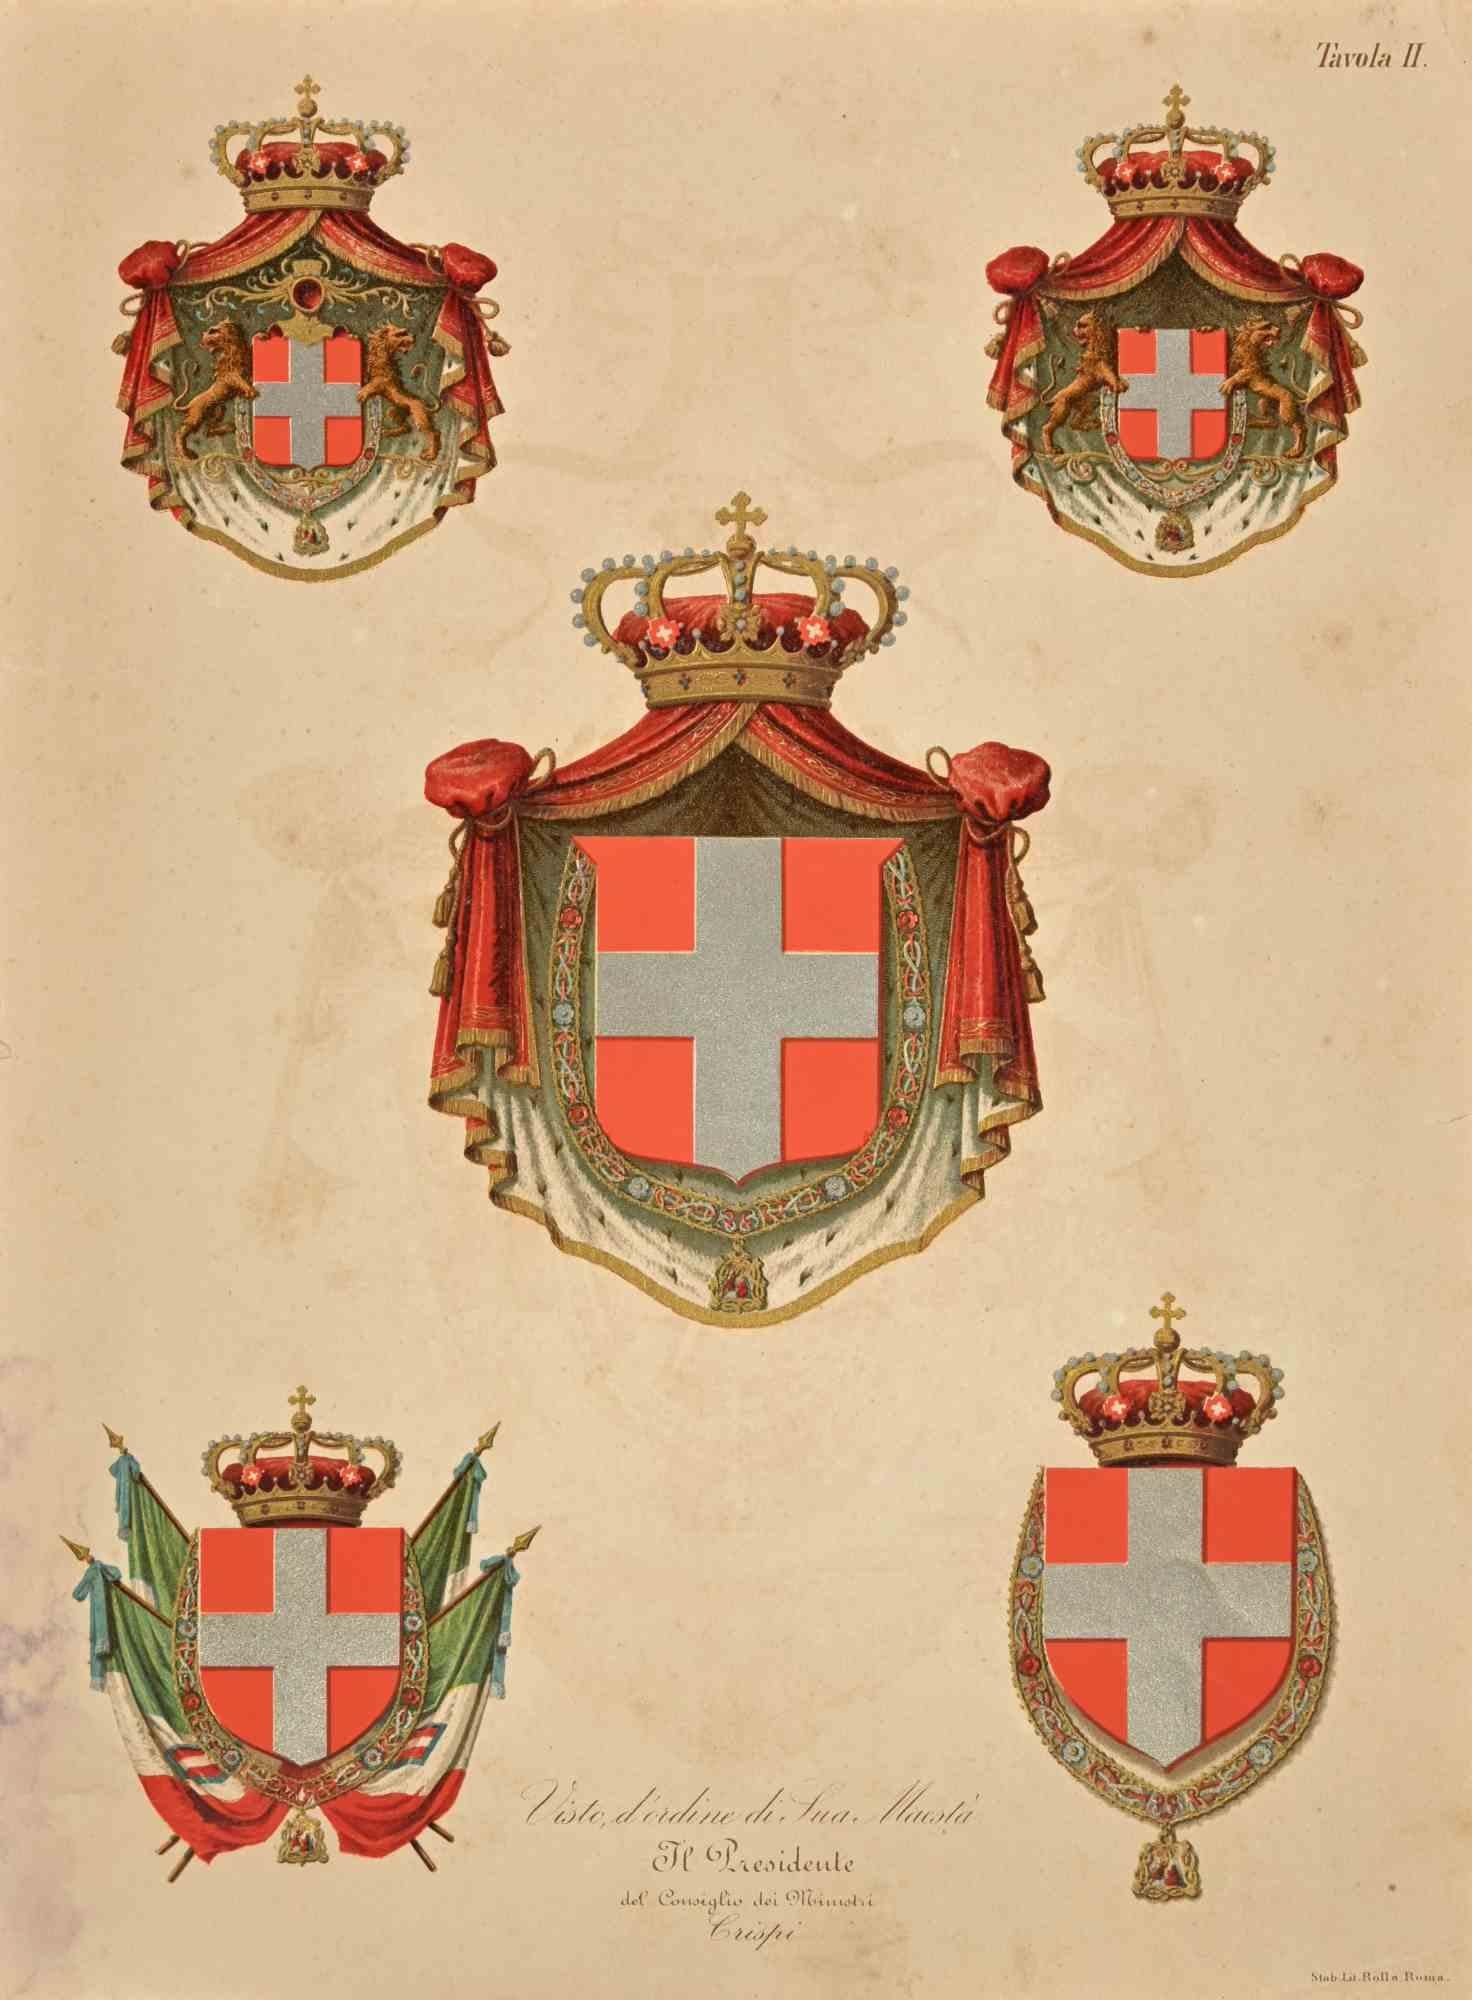 Unknown Figurative Print - Savoy Coat of Arms - Lithograph - 19th Century